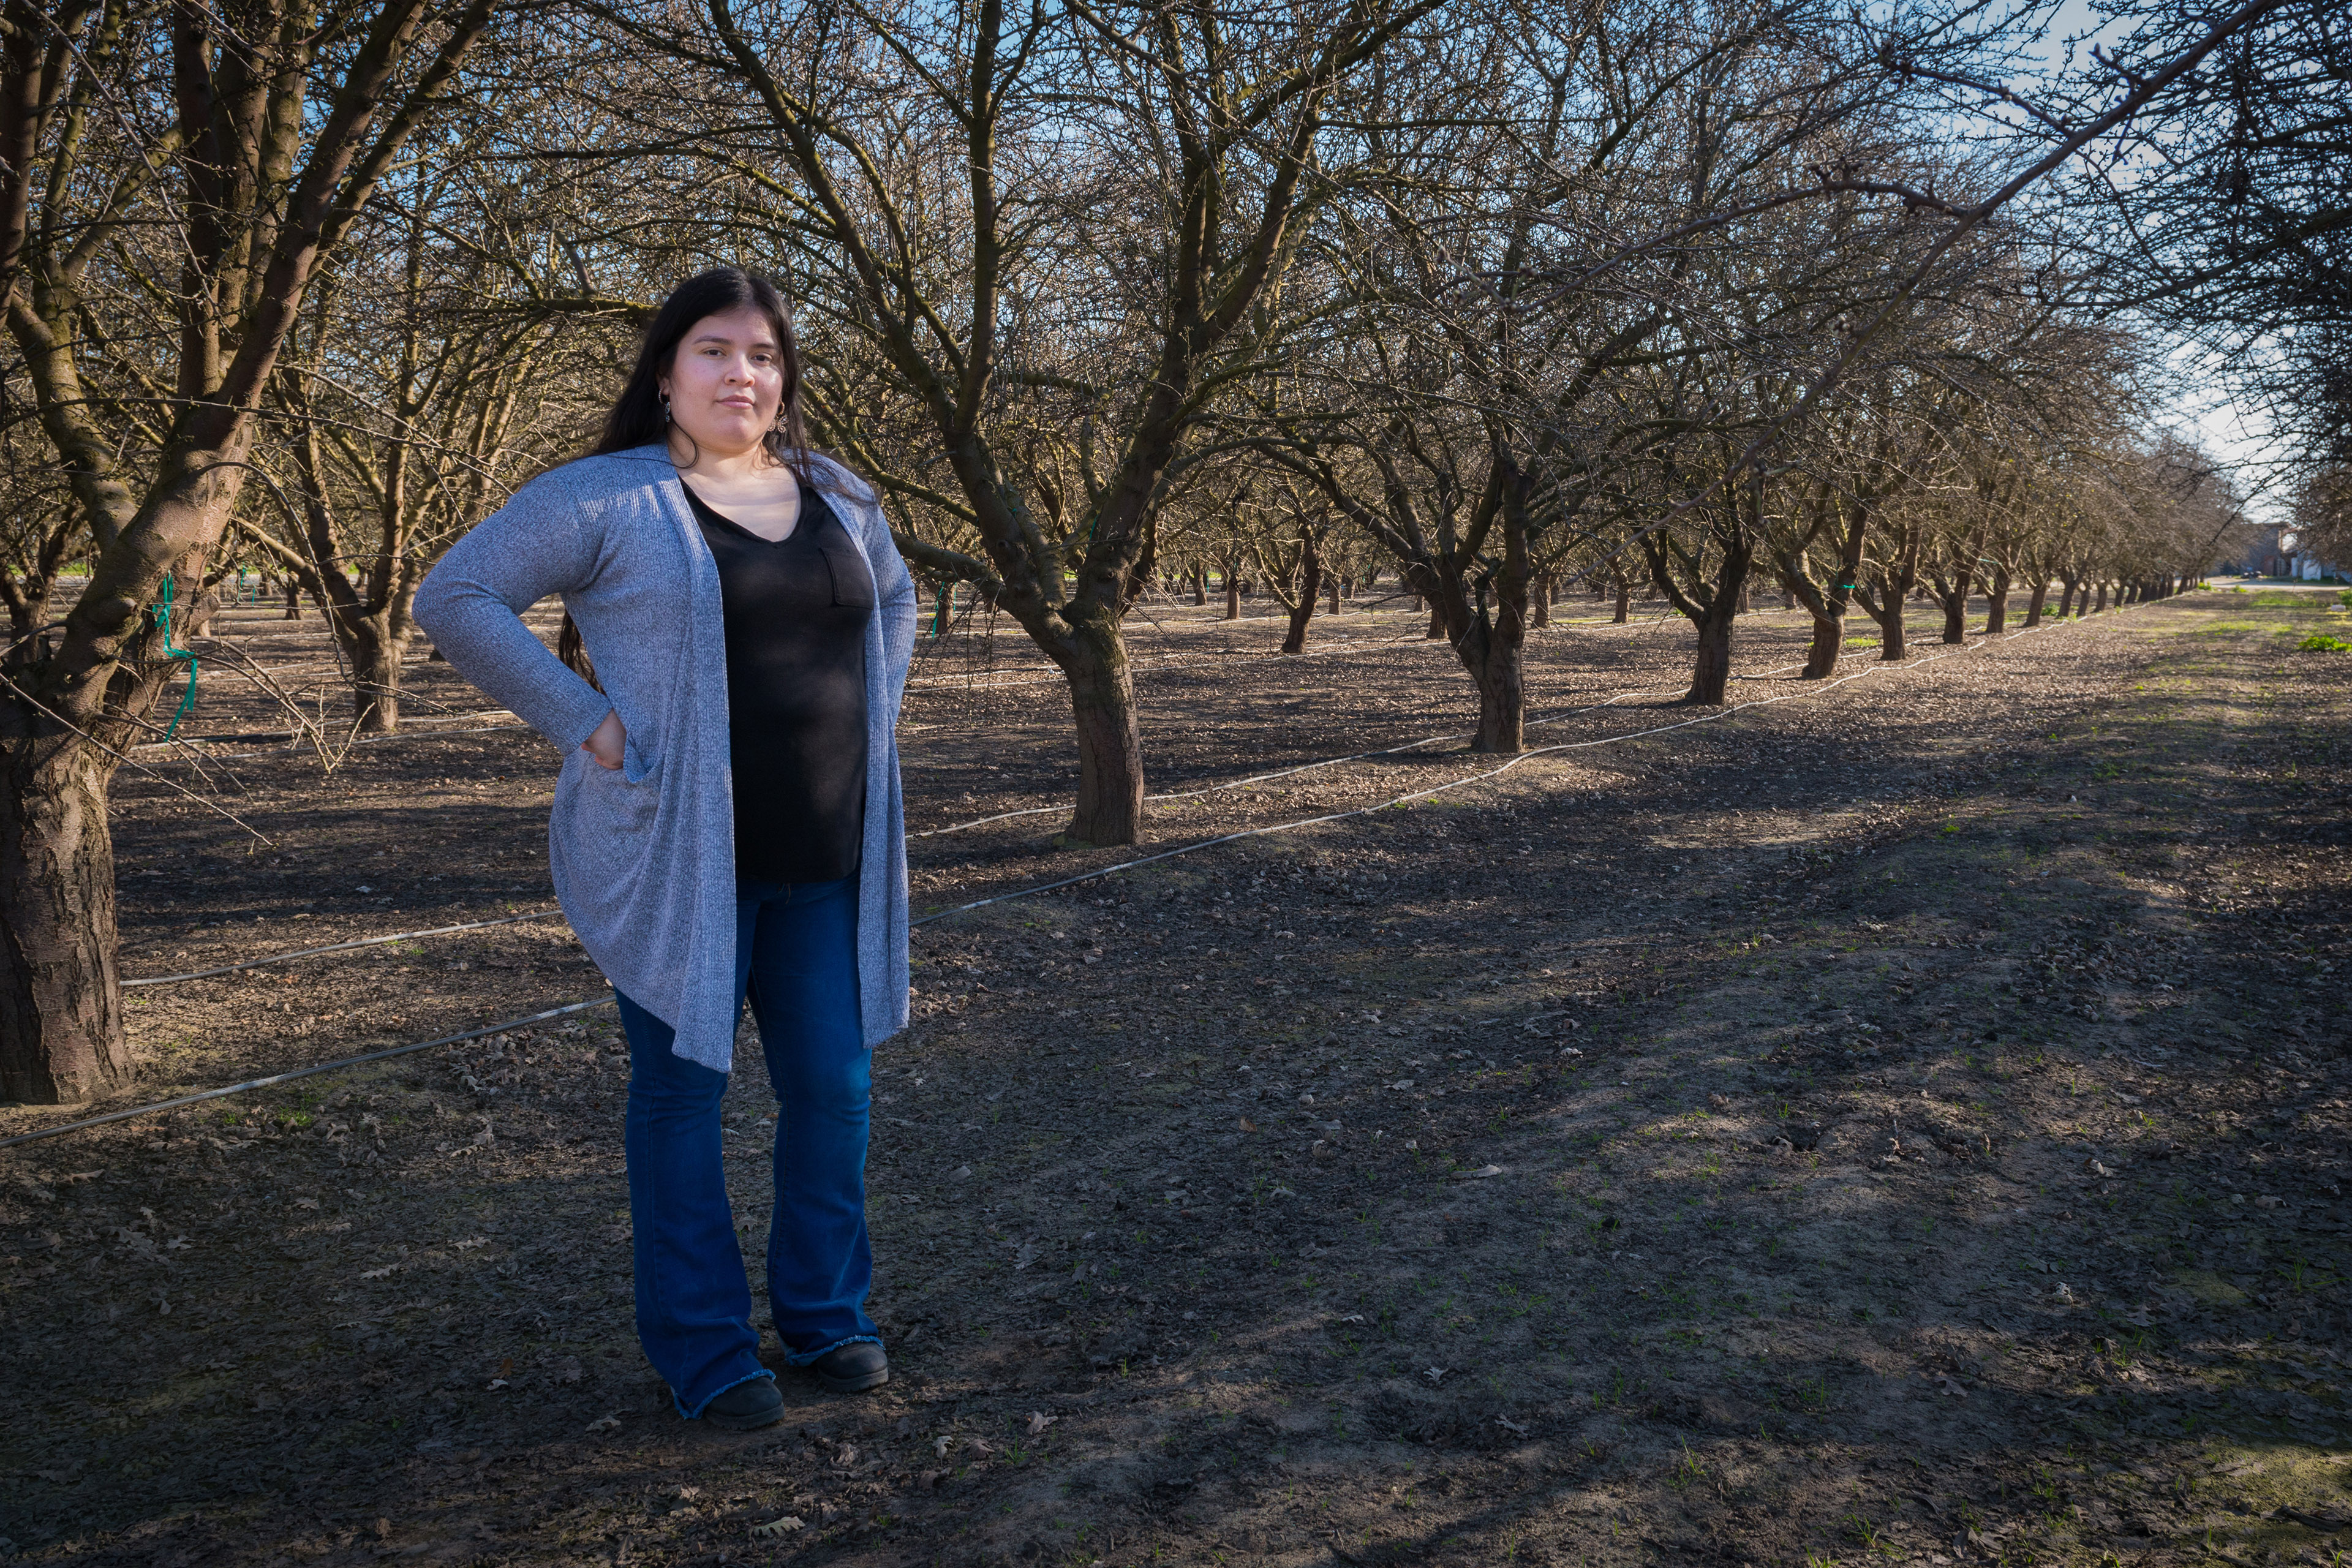 Carolina Morga Tapia stands outside, amid almond trees. The trees have no leaves, signaling the time of year.